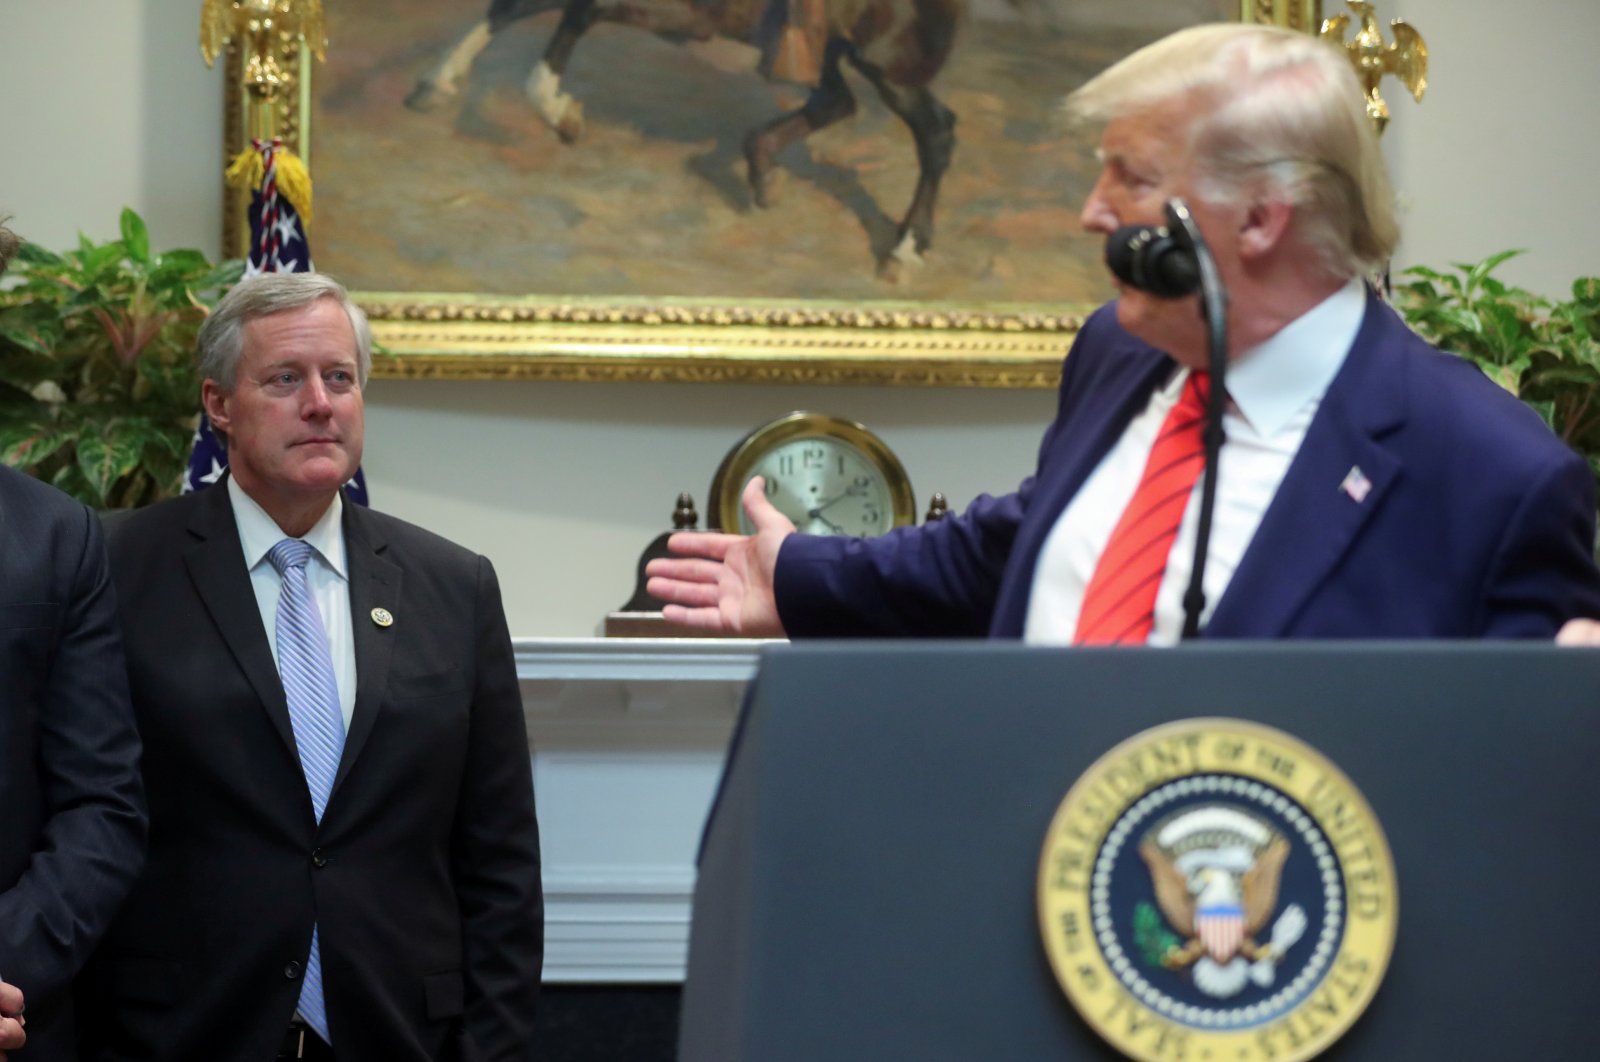 U.S. President Donald Trump gestures back at Rep. Mark Meadows (R-NC) in the Roosevelt Room of the White House in Washington, U.S., October 9, 2019. (Reuters File Photo)